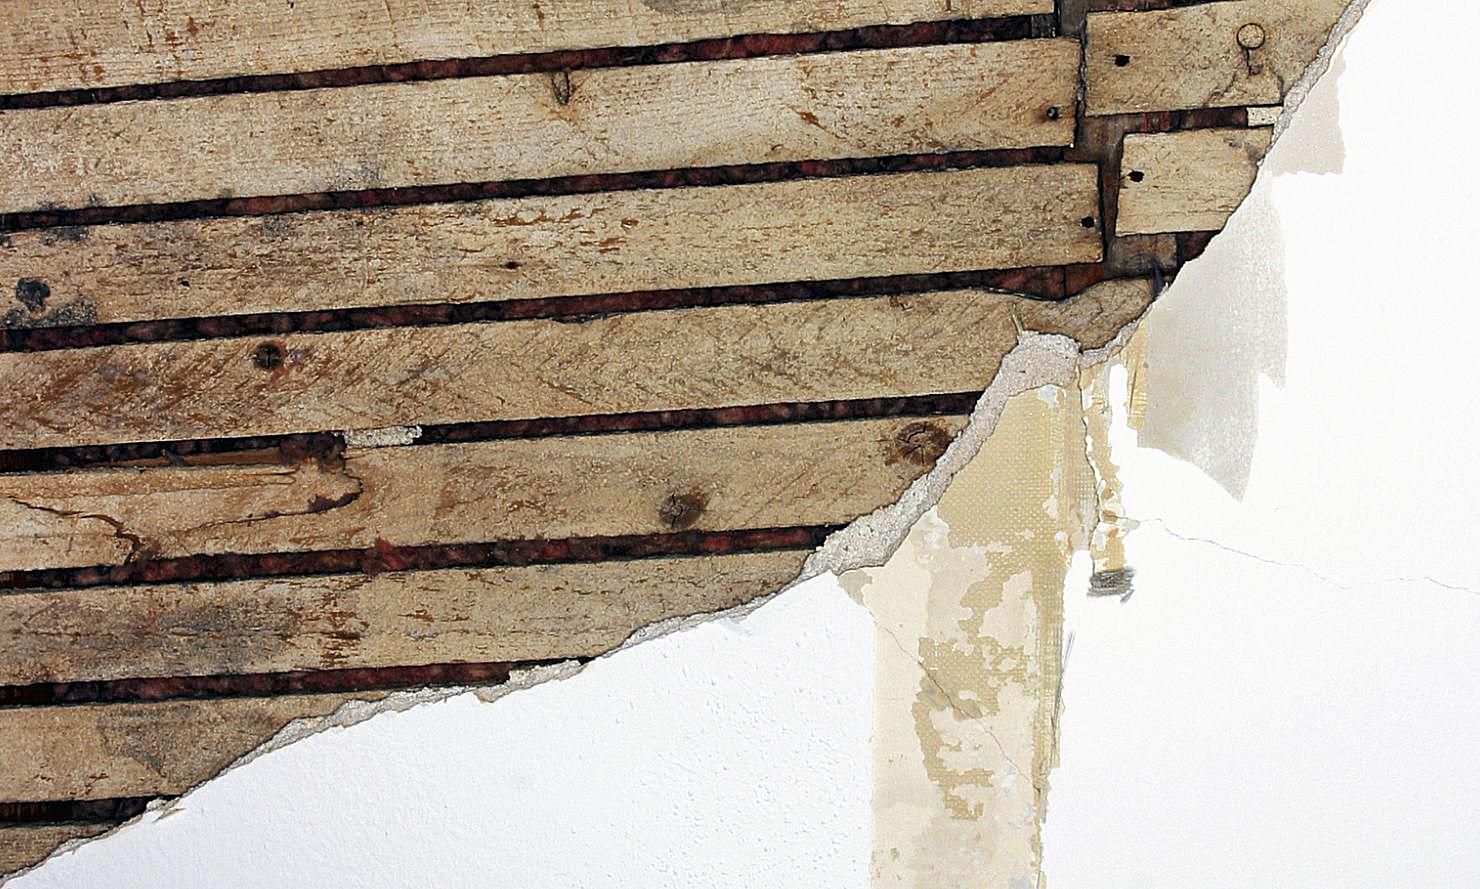 find studs in plaster and lath wall